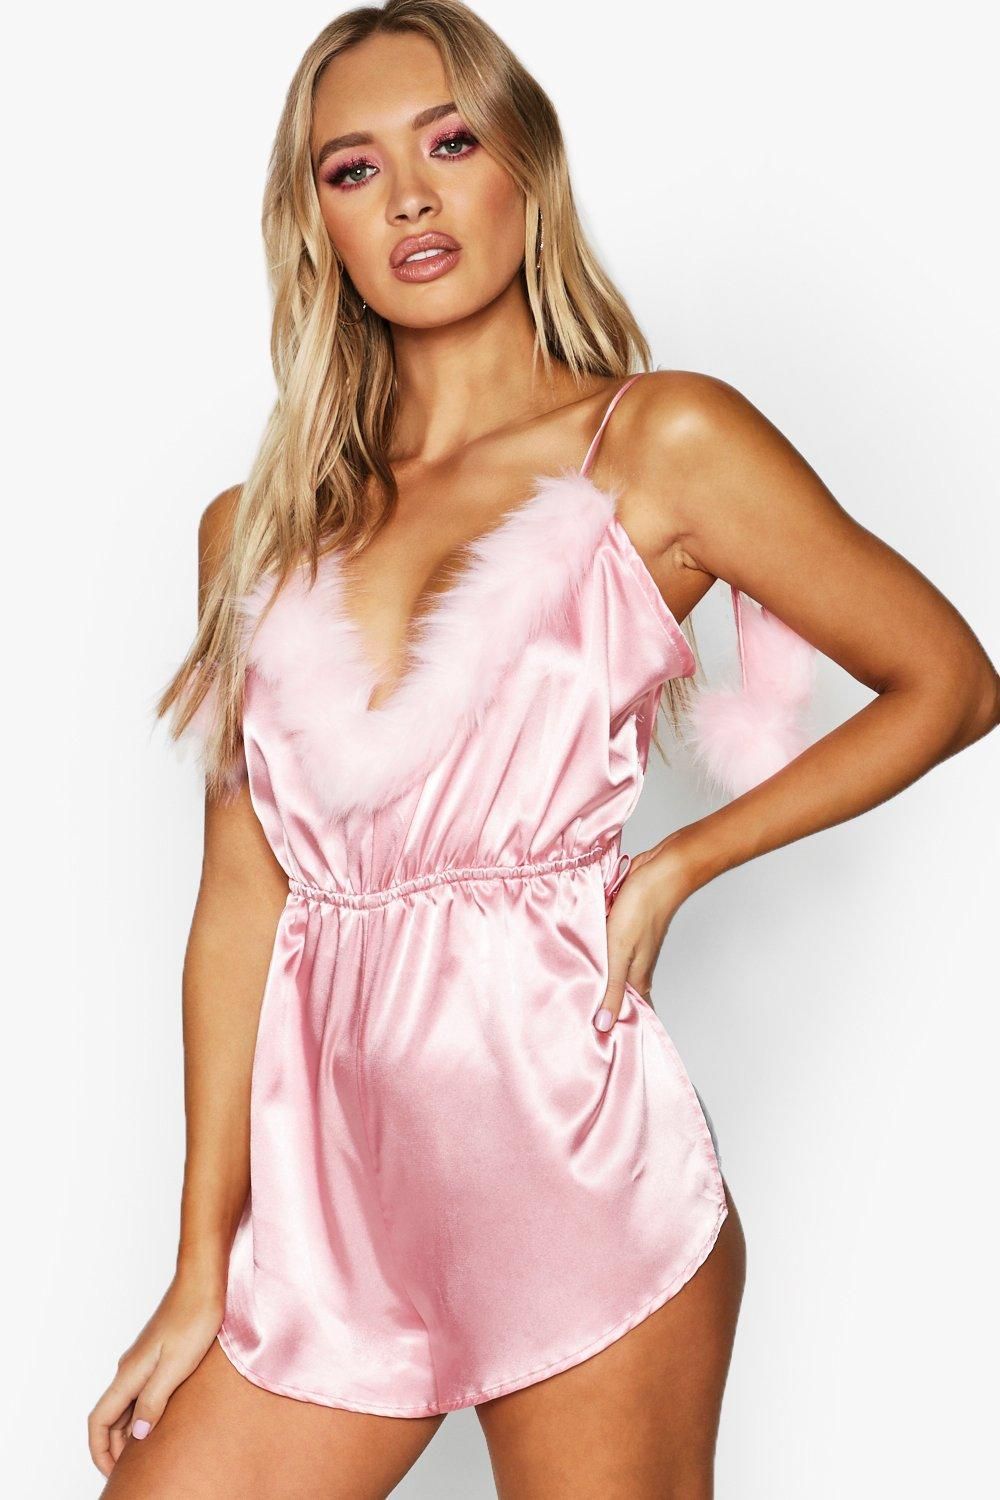 Gemma Collins Strappy Romper With Fluffy TrimGemma Collins Strappy Romper With Fluffy Trim | Boohoo.com (UK & IE)